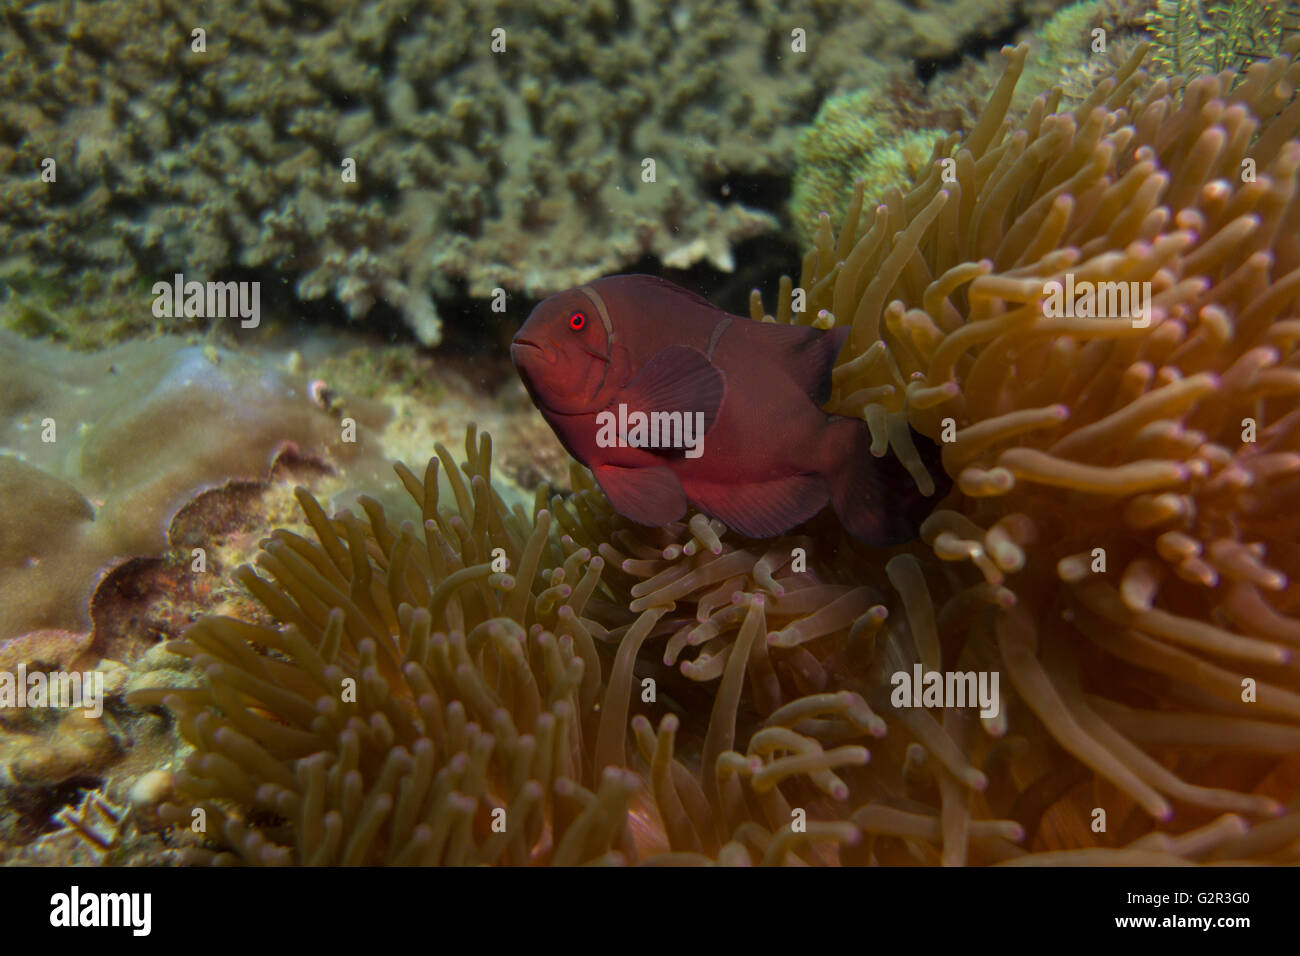 Anemonefish from the South China Sea, Coral Triangle, Brunei. Stock Photo